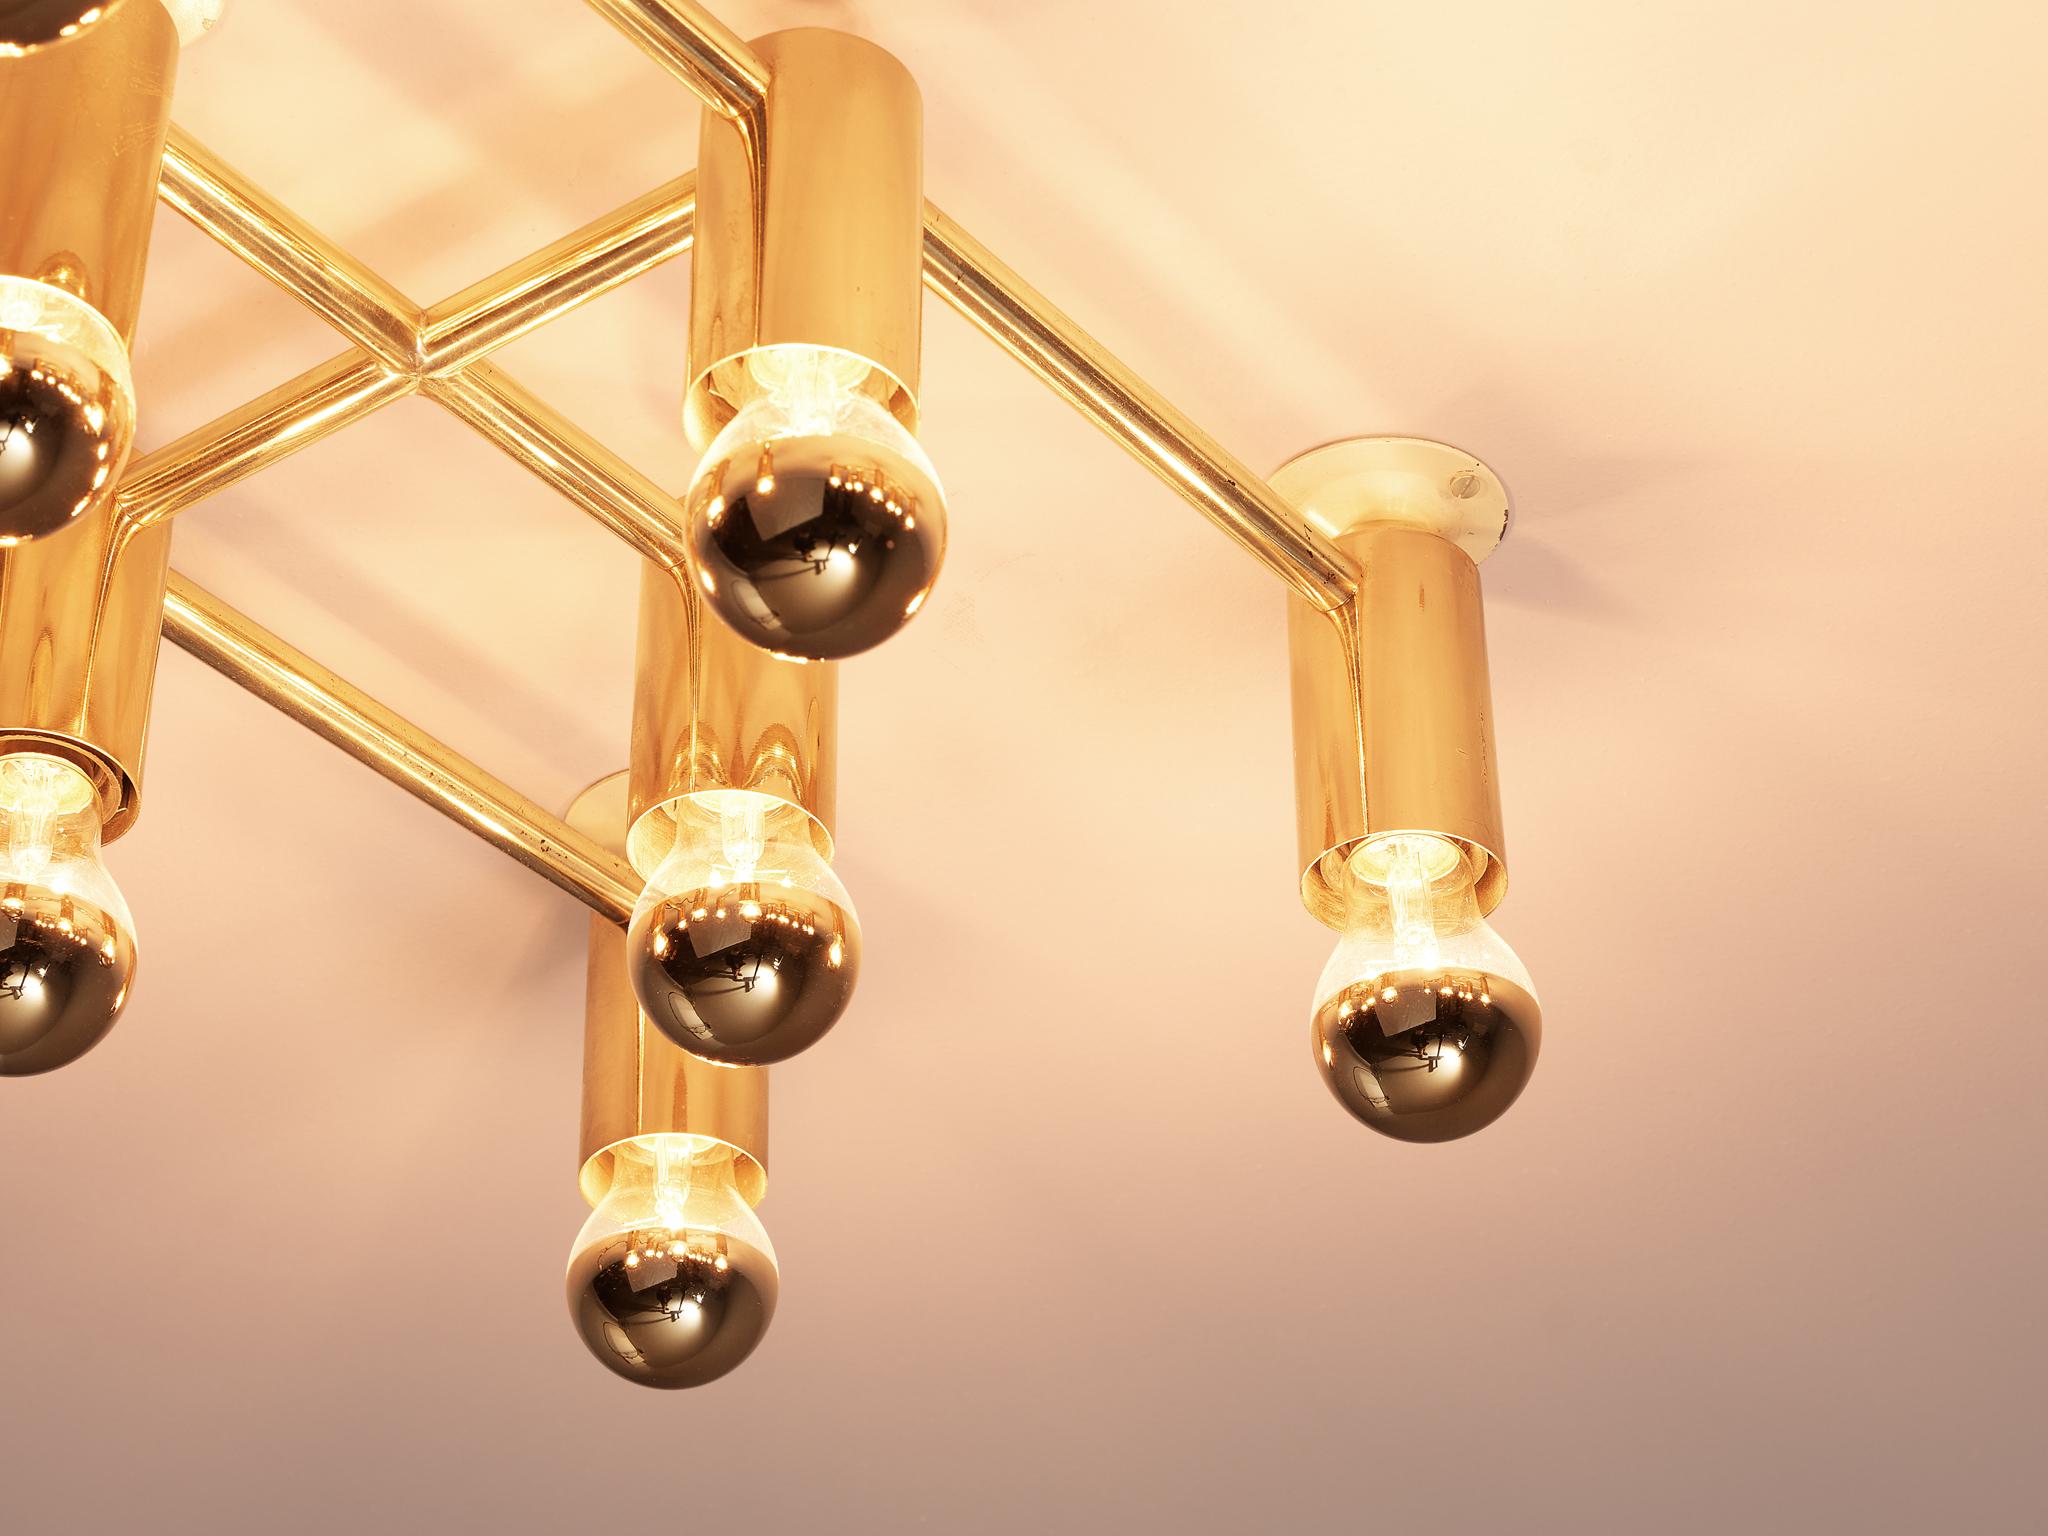 Mid-20th Century Midcentury Brass Ceiling Lights For Sale